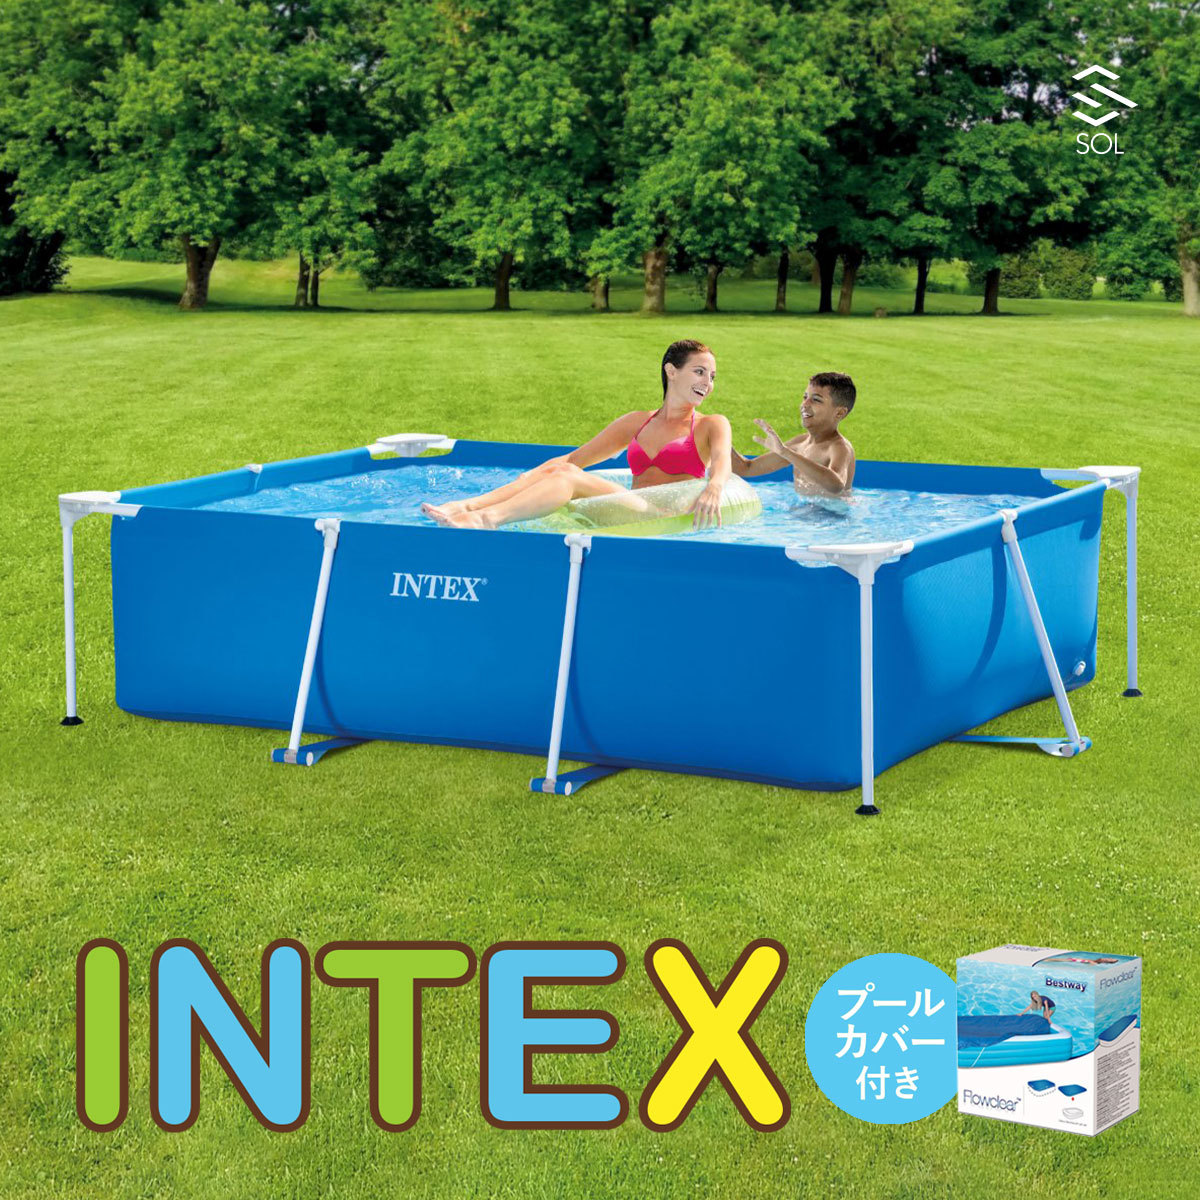 INTEX pool exclusive use with cover large regular goods Inte k attrition k tang la frame home use pool strengthen vinyl 3 layer structure 220cmX150cmX60cm 28270